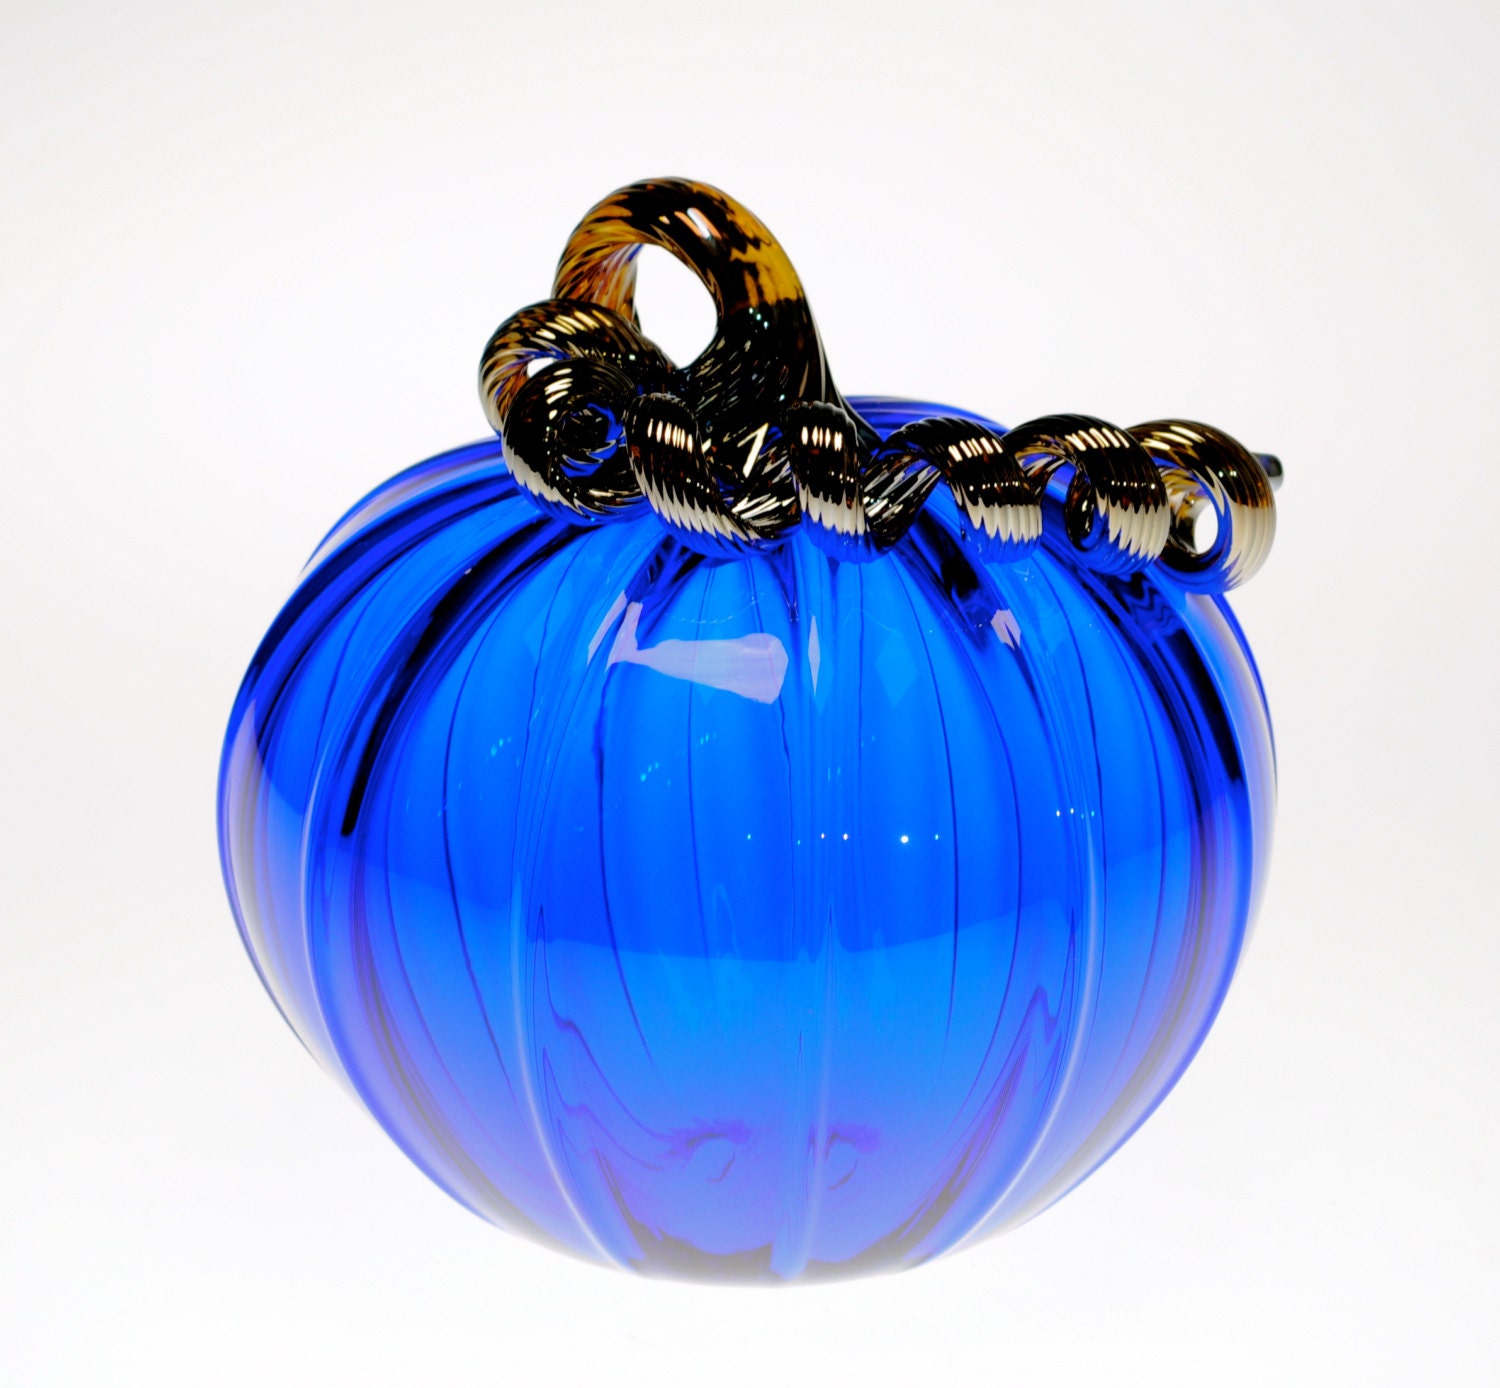 Cobalt Blue Pumpkin with Shiny Stem. Made in Corning NY